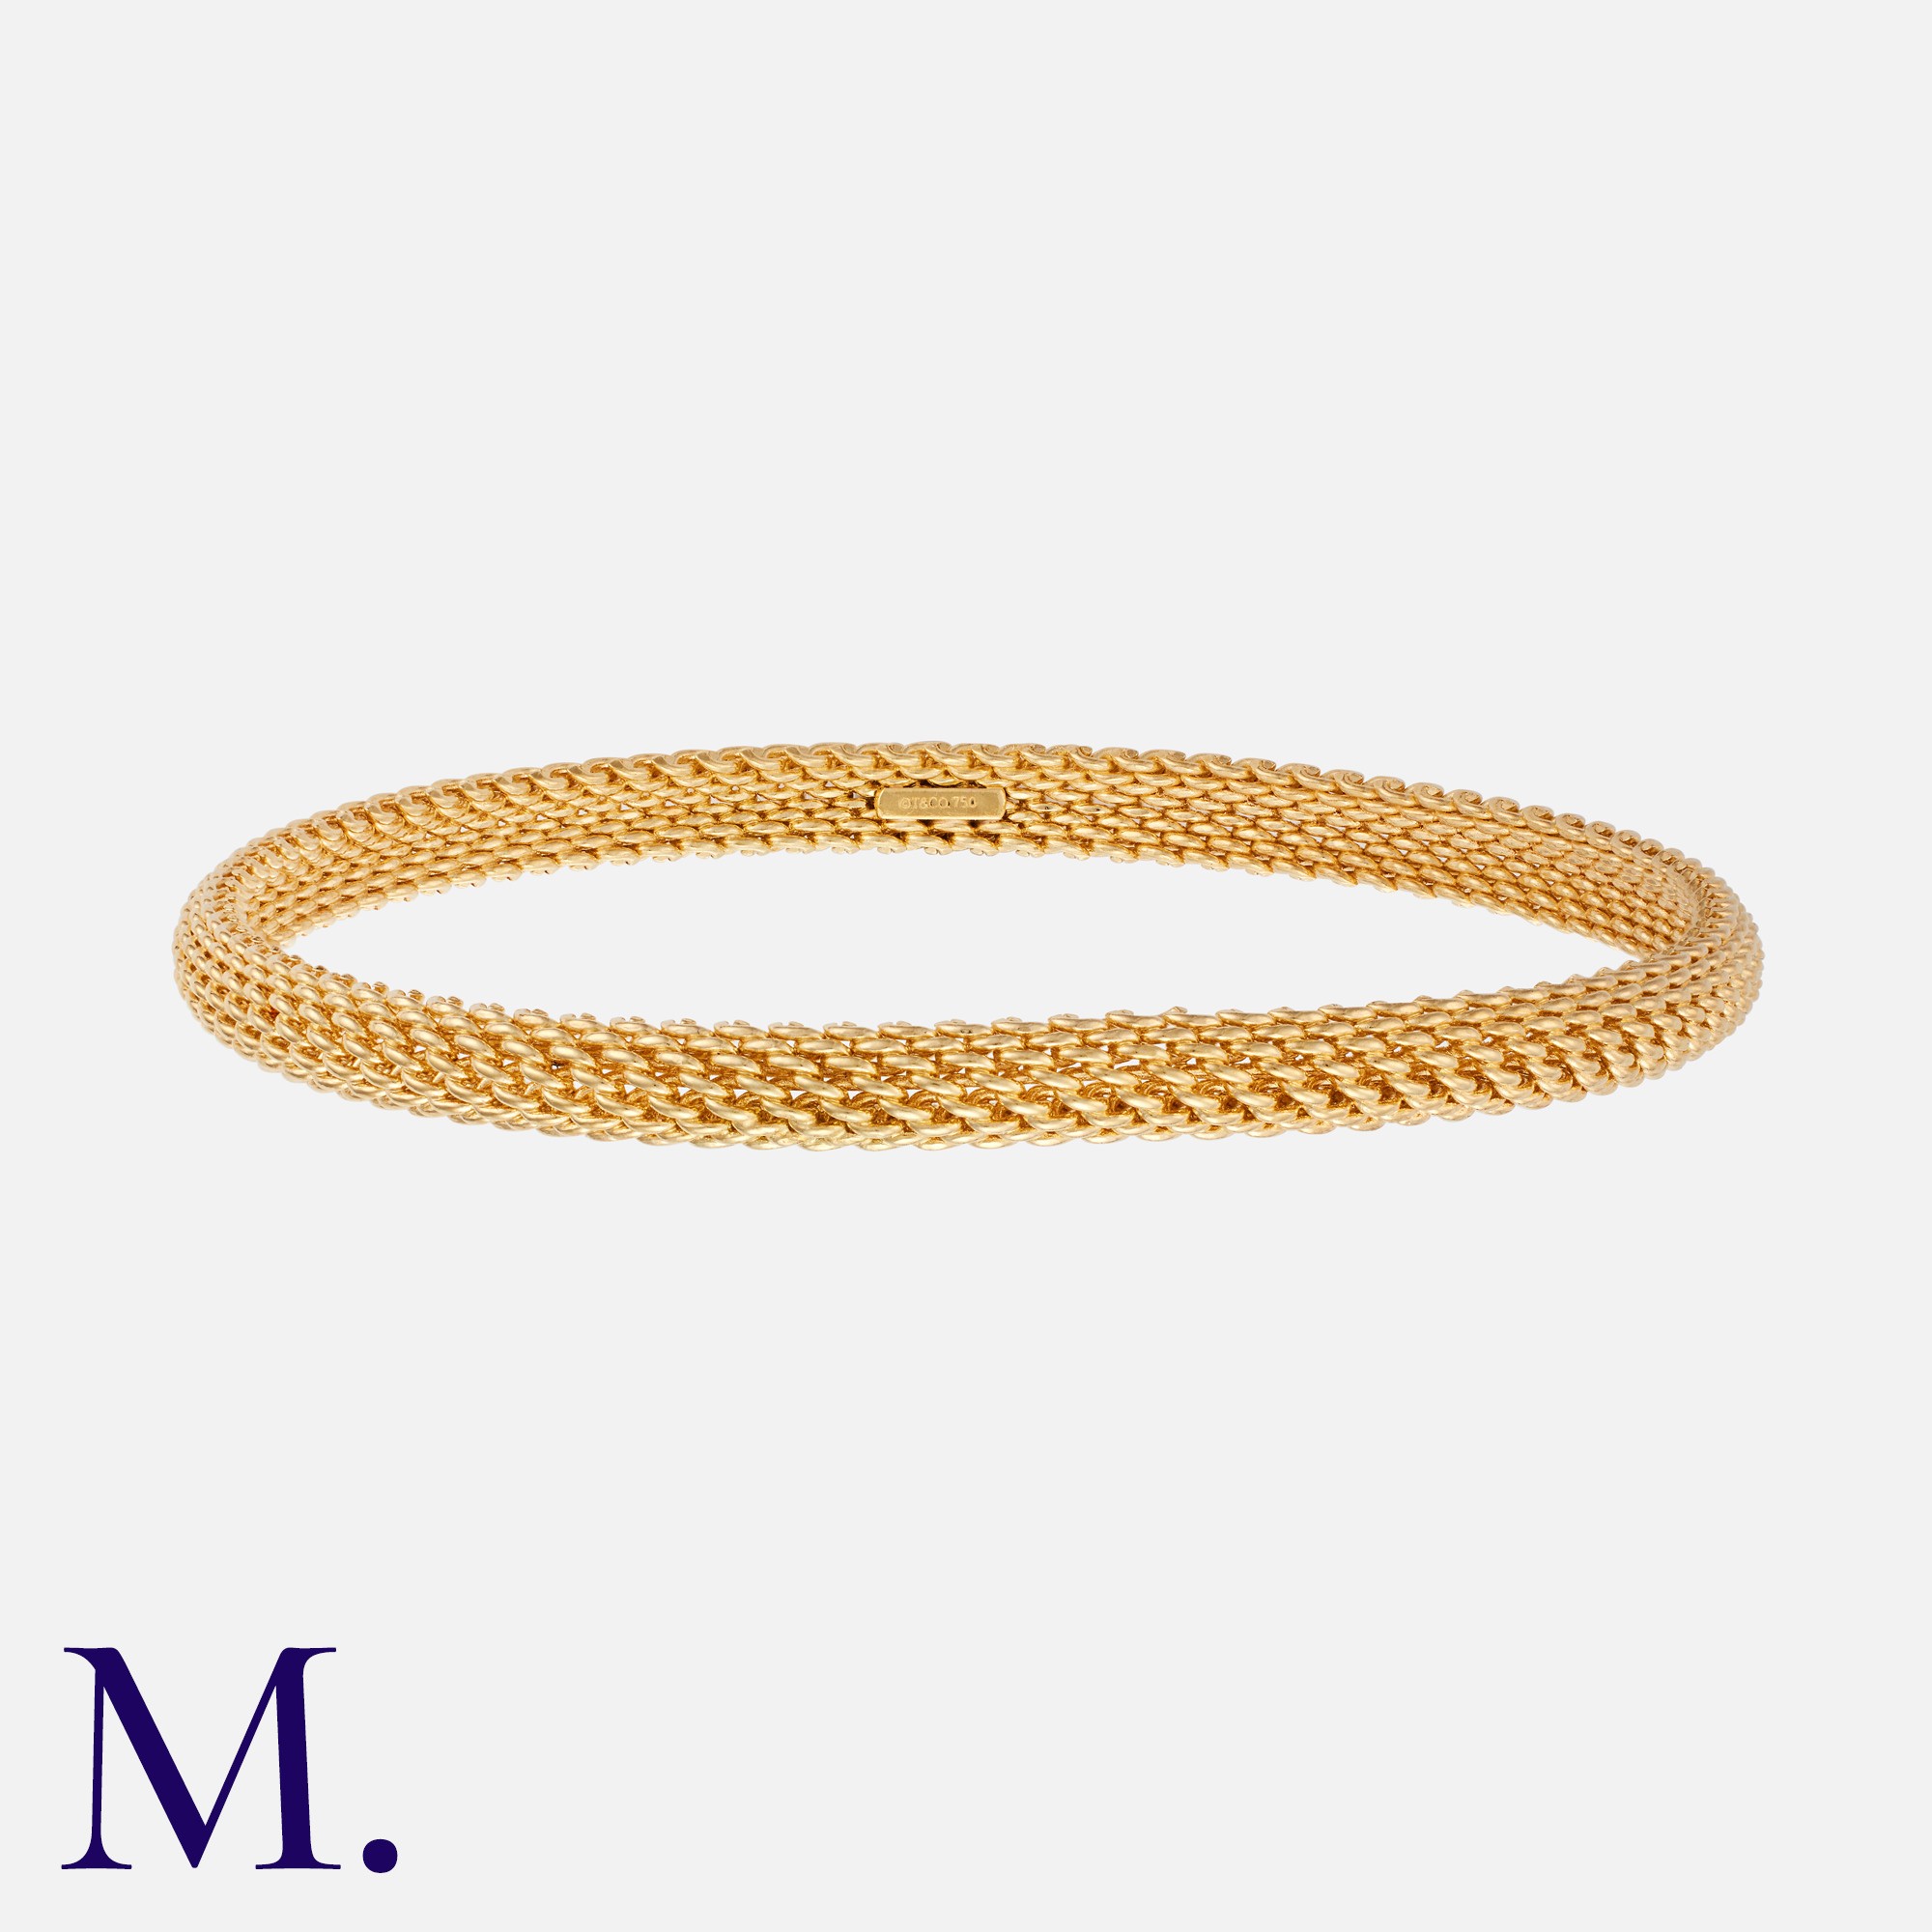 TIFFANY & CO. A Gold Somerset Mesh Bangle in 18K yellow gold. The bangle is marked for 18ct gold and